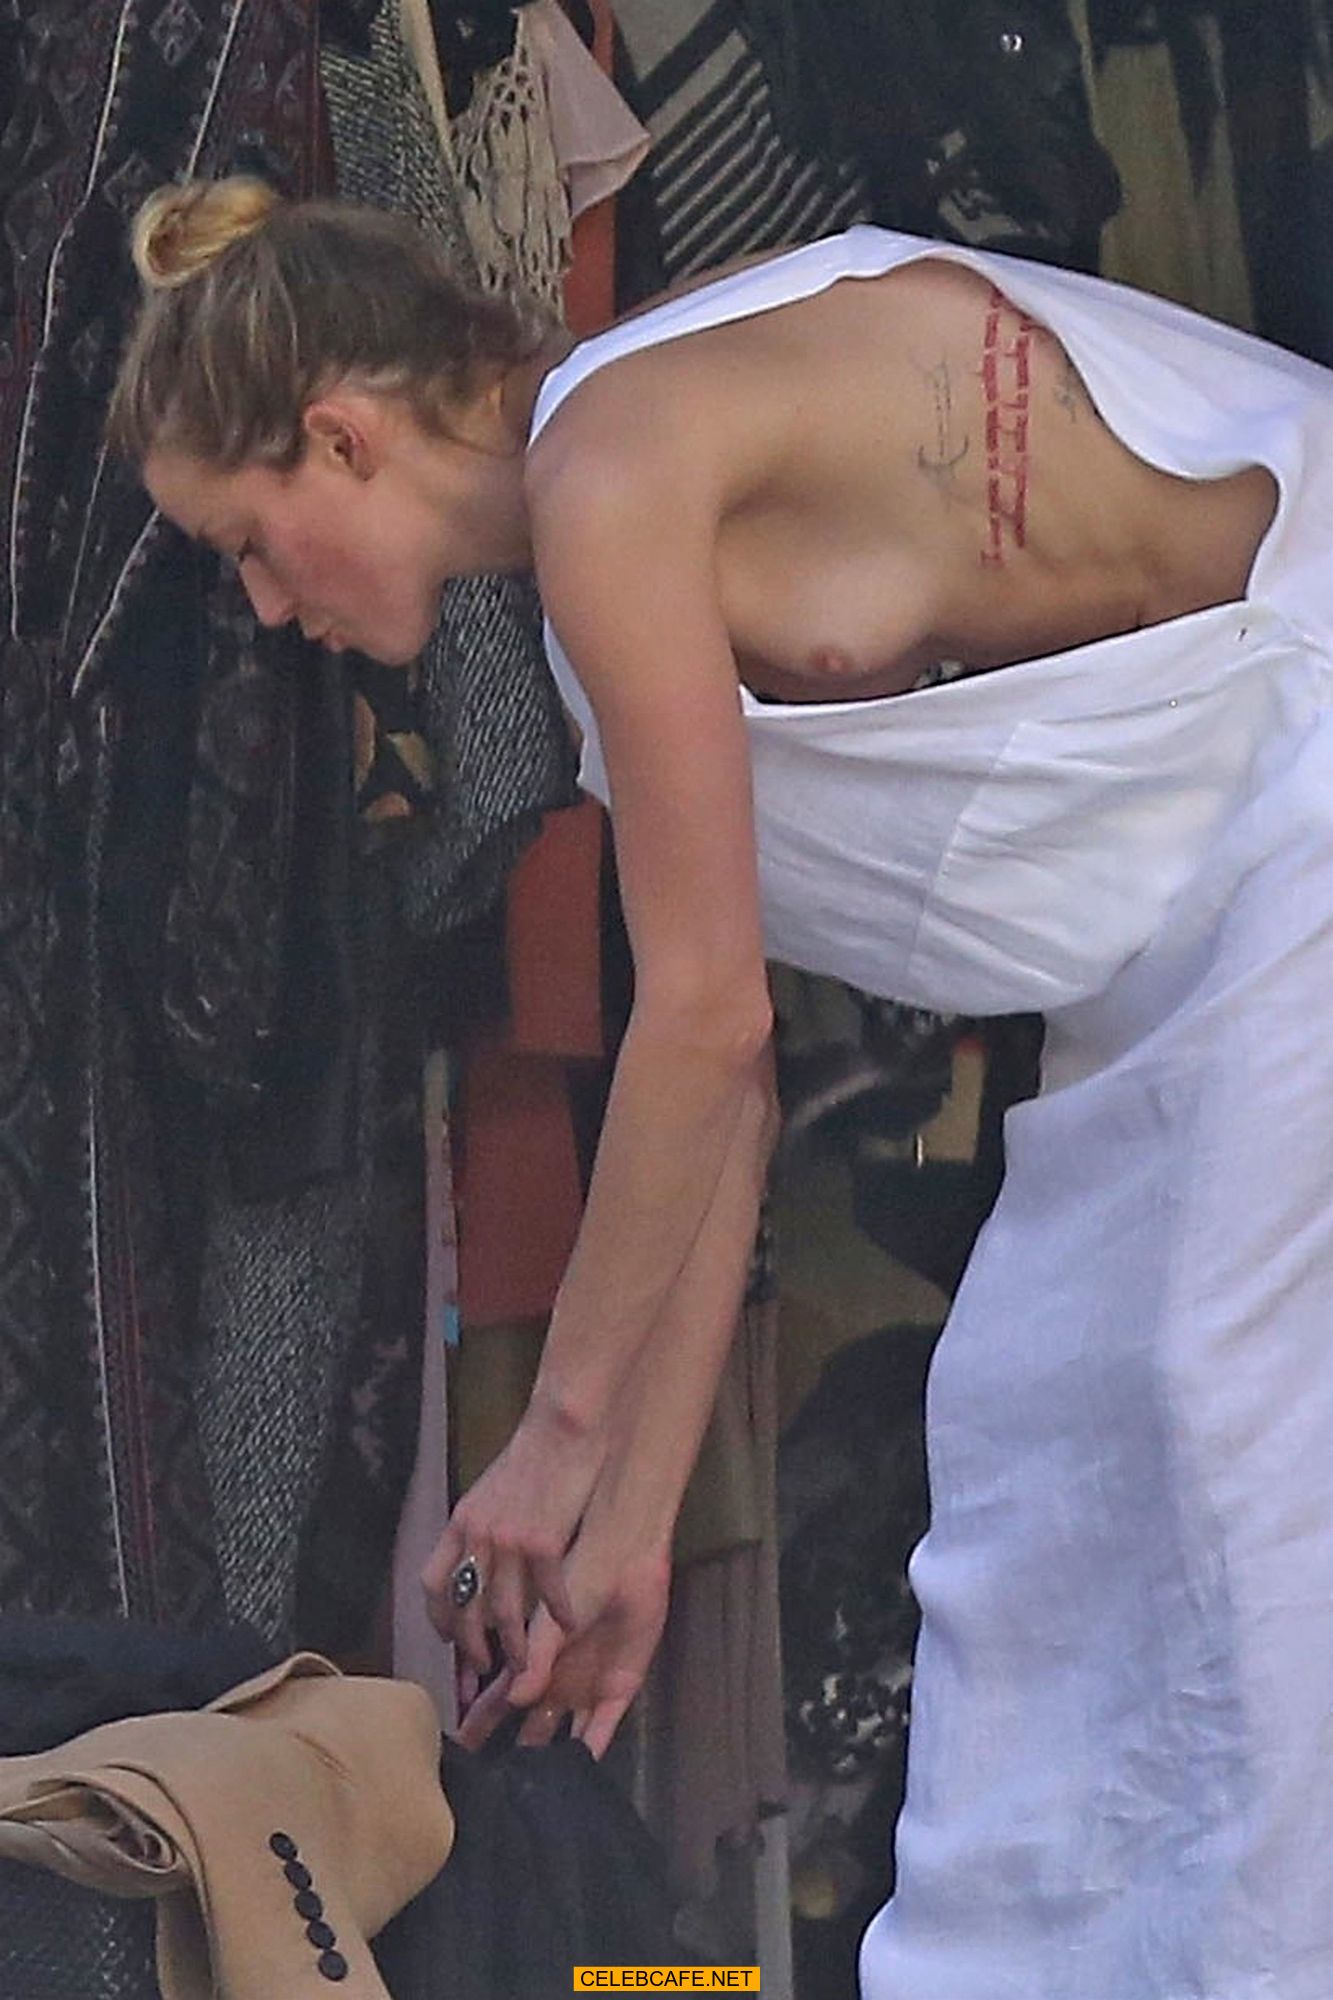 amber_heard_has_a_nip-slip_while_cleaning_out_her_garage_in_la_07302018_1.jpg